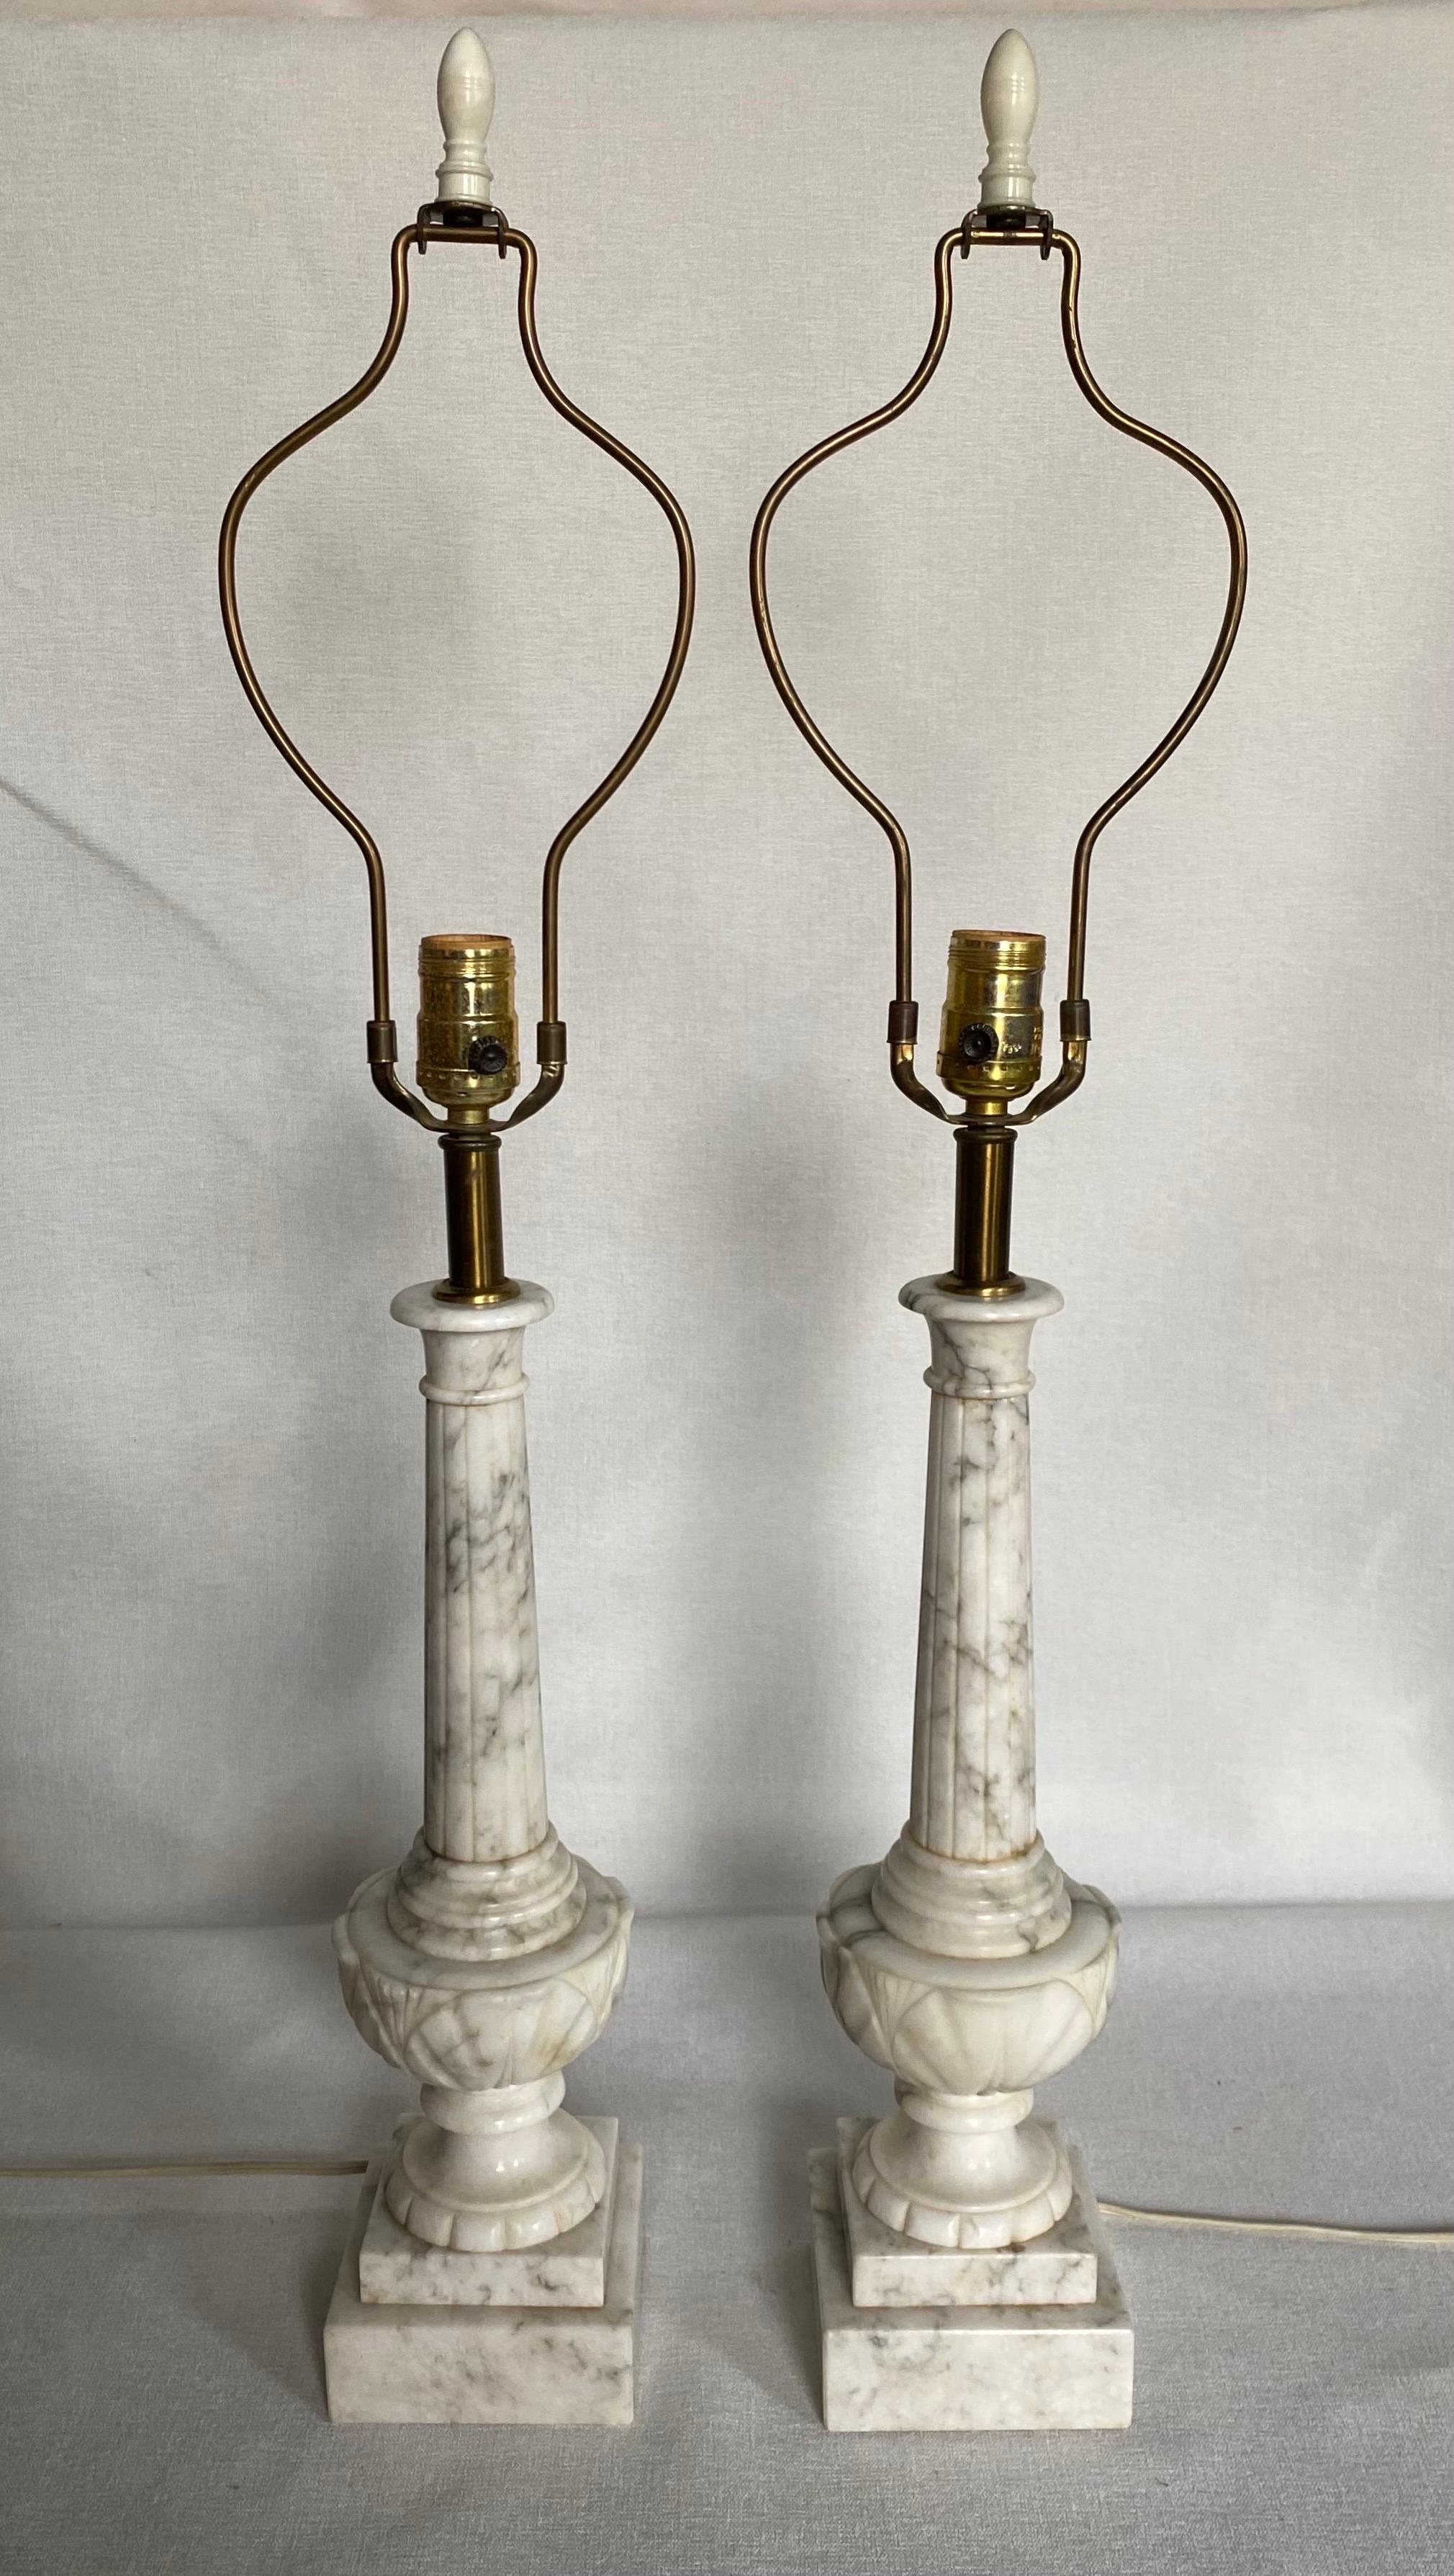 Beautiful pair of carved marble table lamps. These Neoclassical style lamps feature fluted columns and urn form bases mounted on square plinths. Perfect lamps for the bedside or dining buffet sideboard. 

Lamp shades not included.